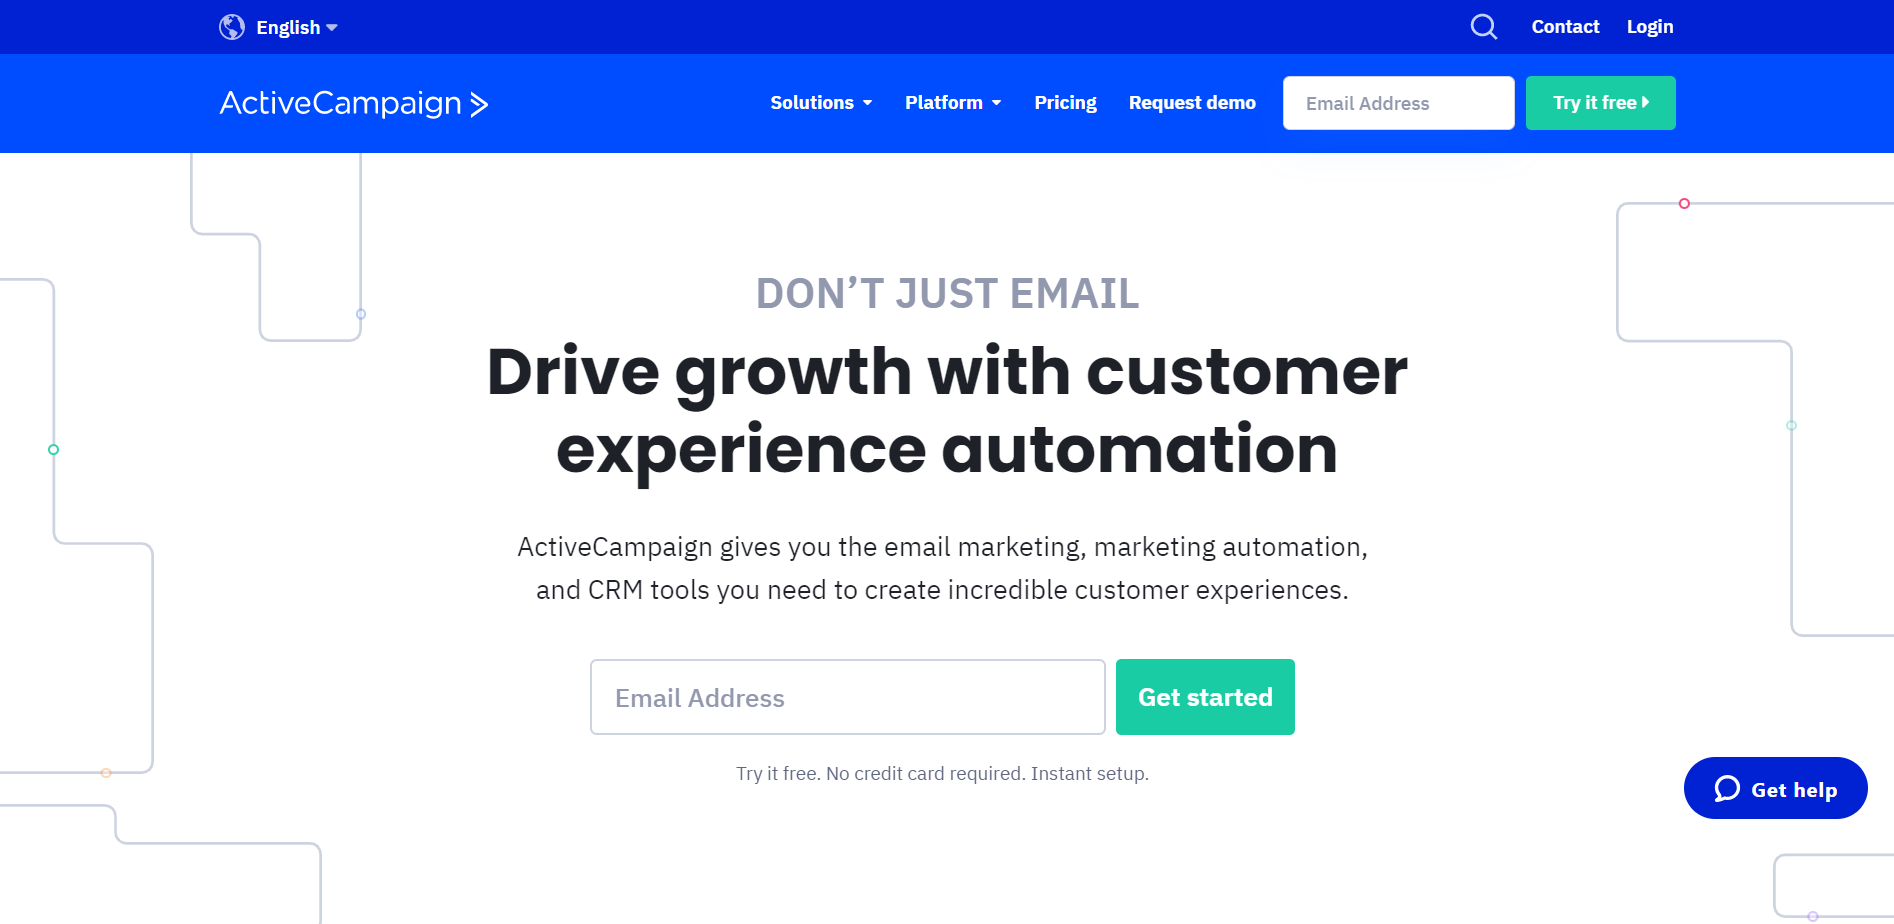 ActiveCampaign 1 Customer Experience Automation Platform